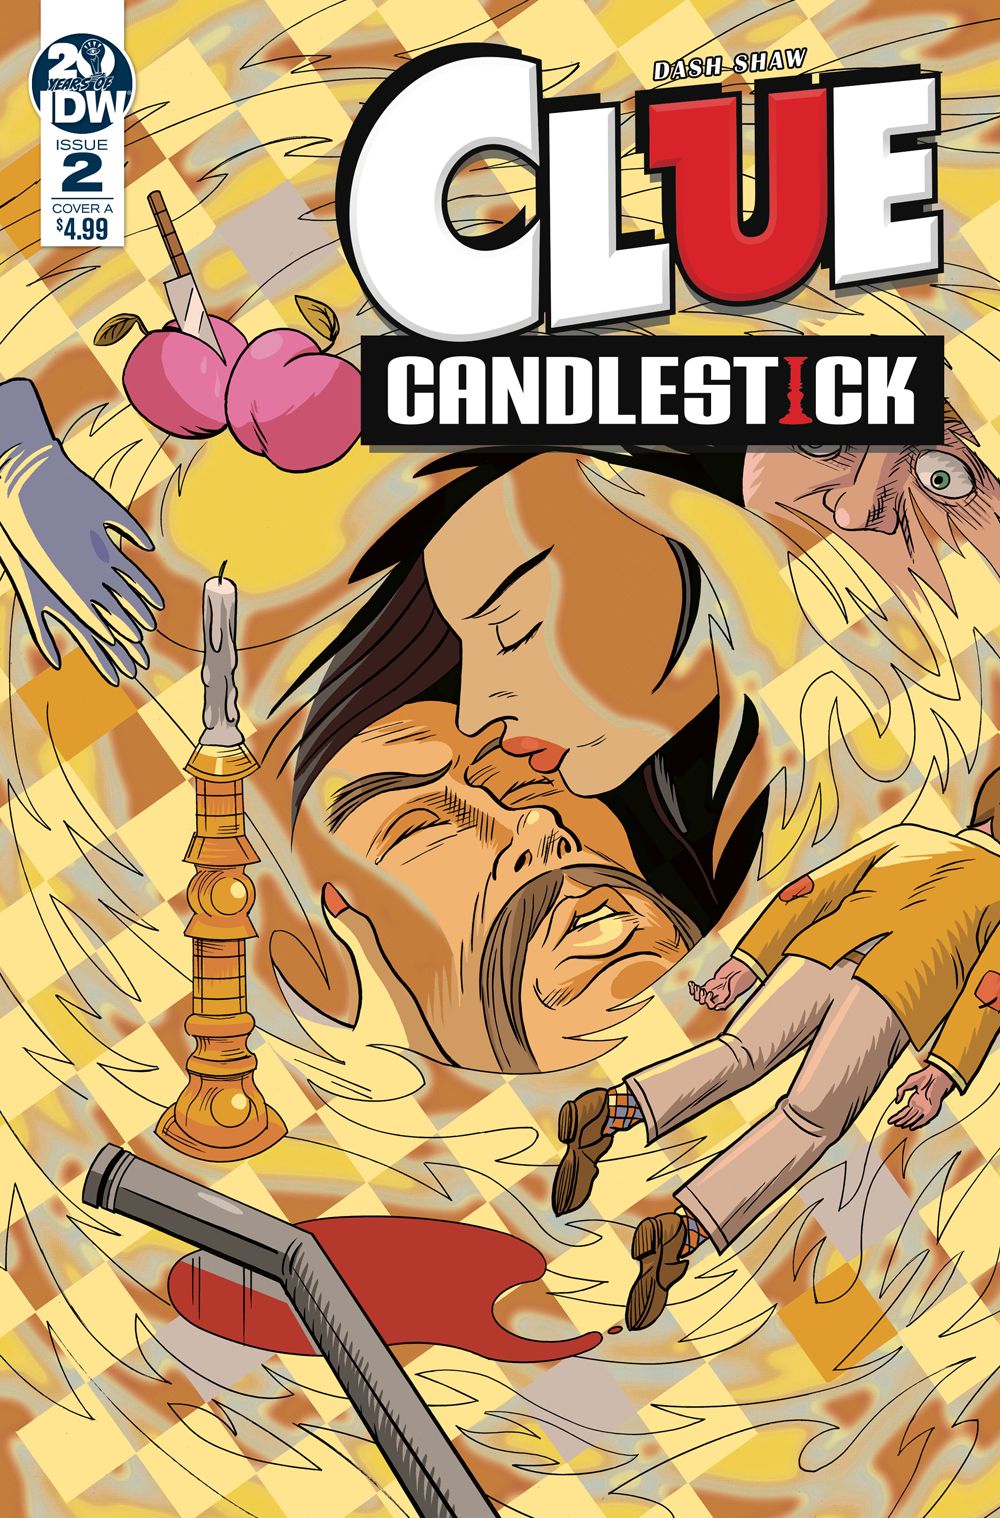 Clue Candlestick #02 (cover)